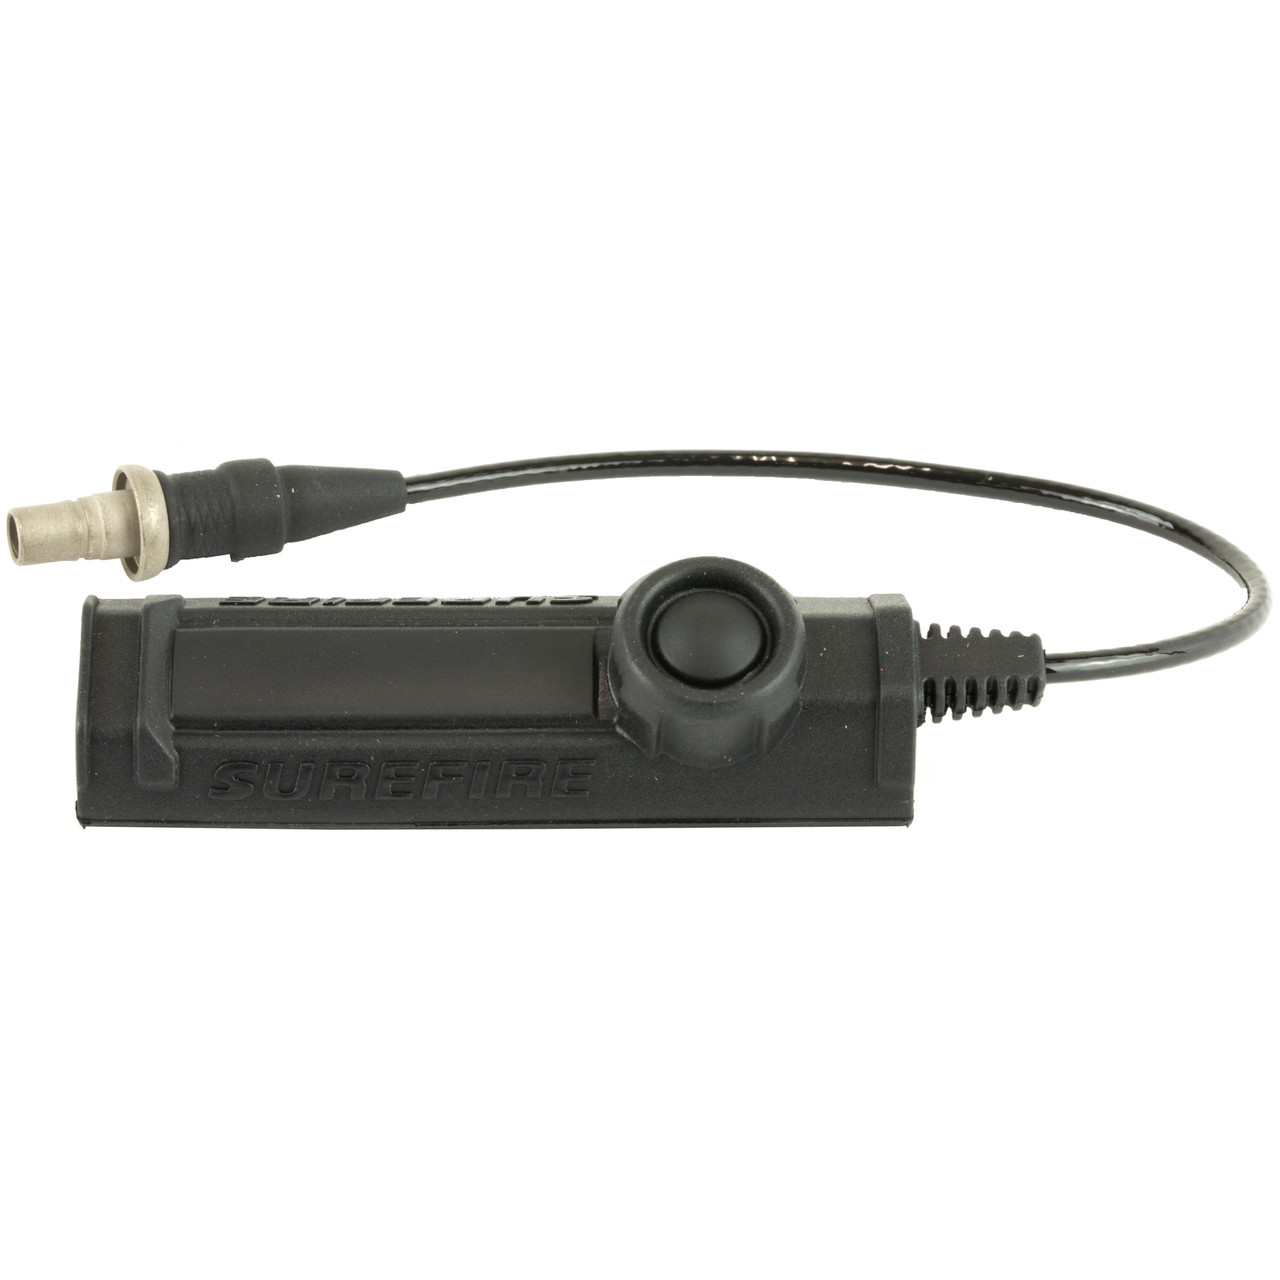 Surefire Remote Dual Switch for WeaponLights